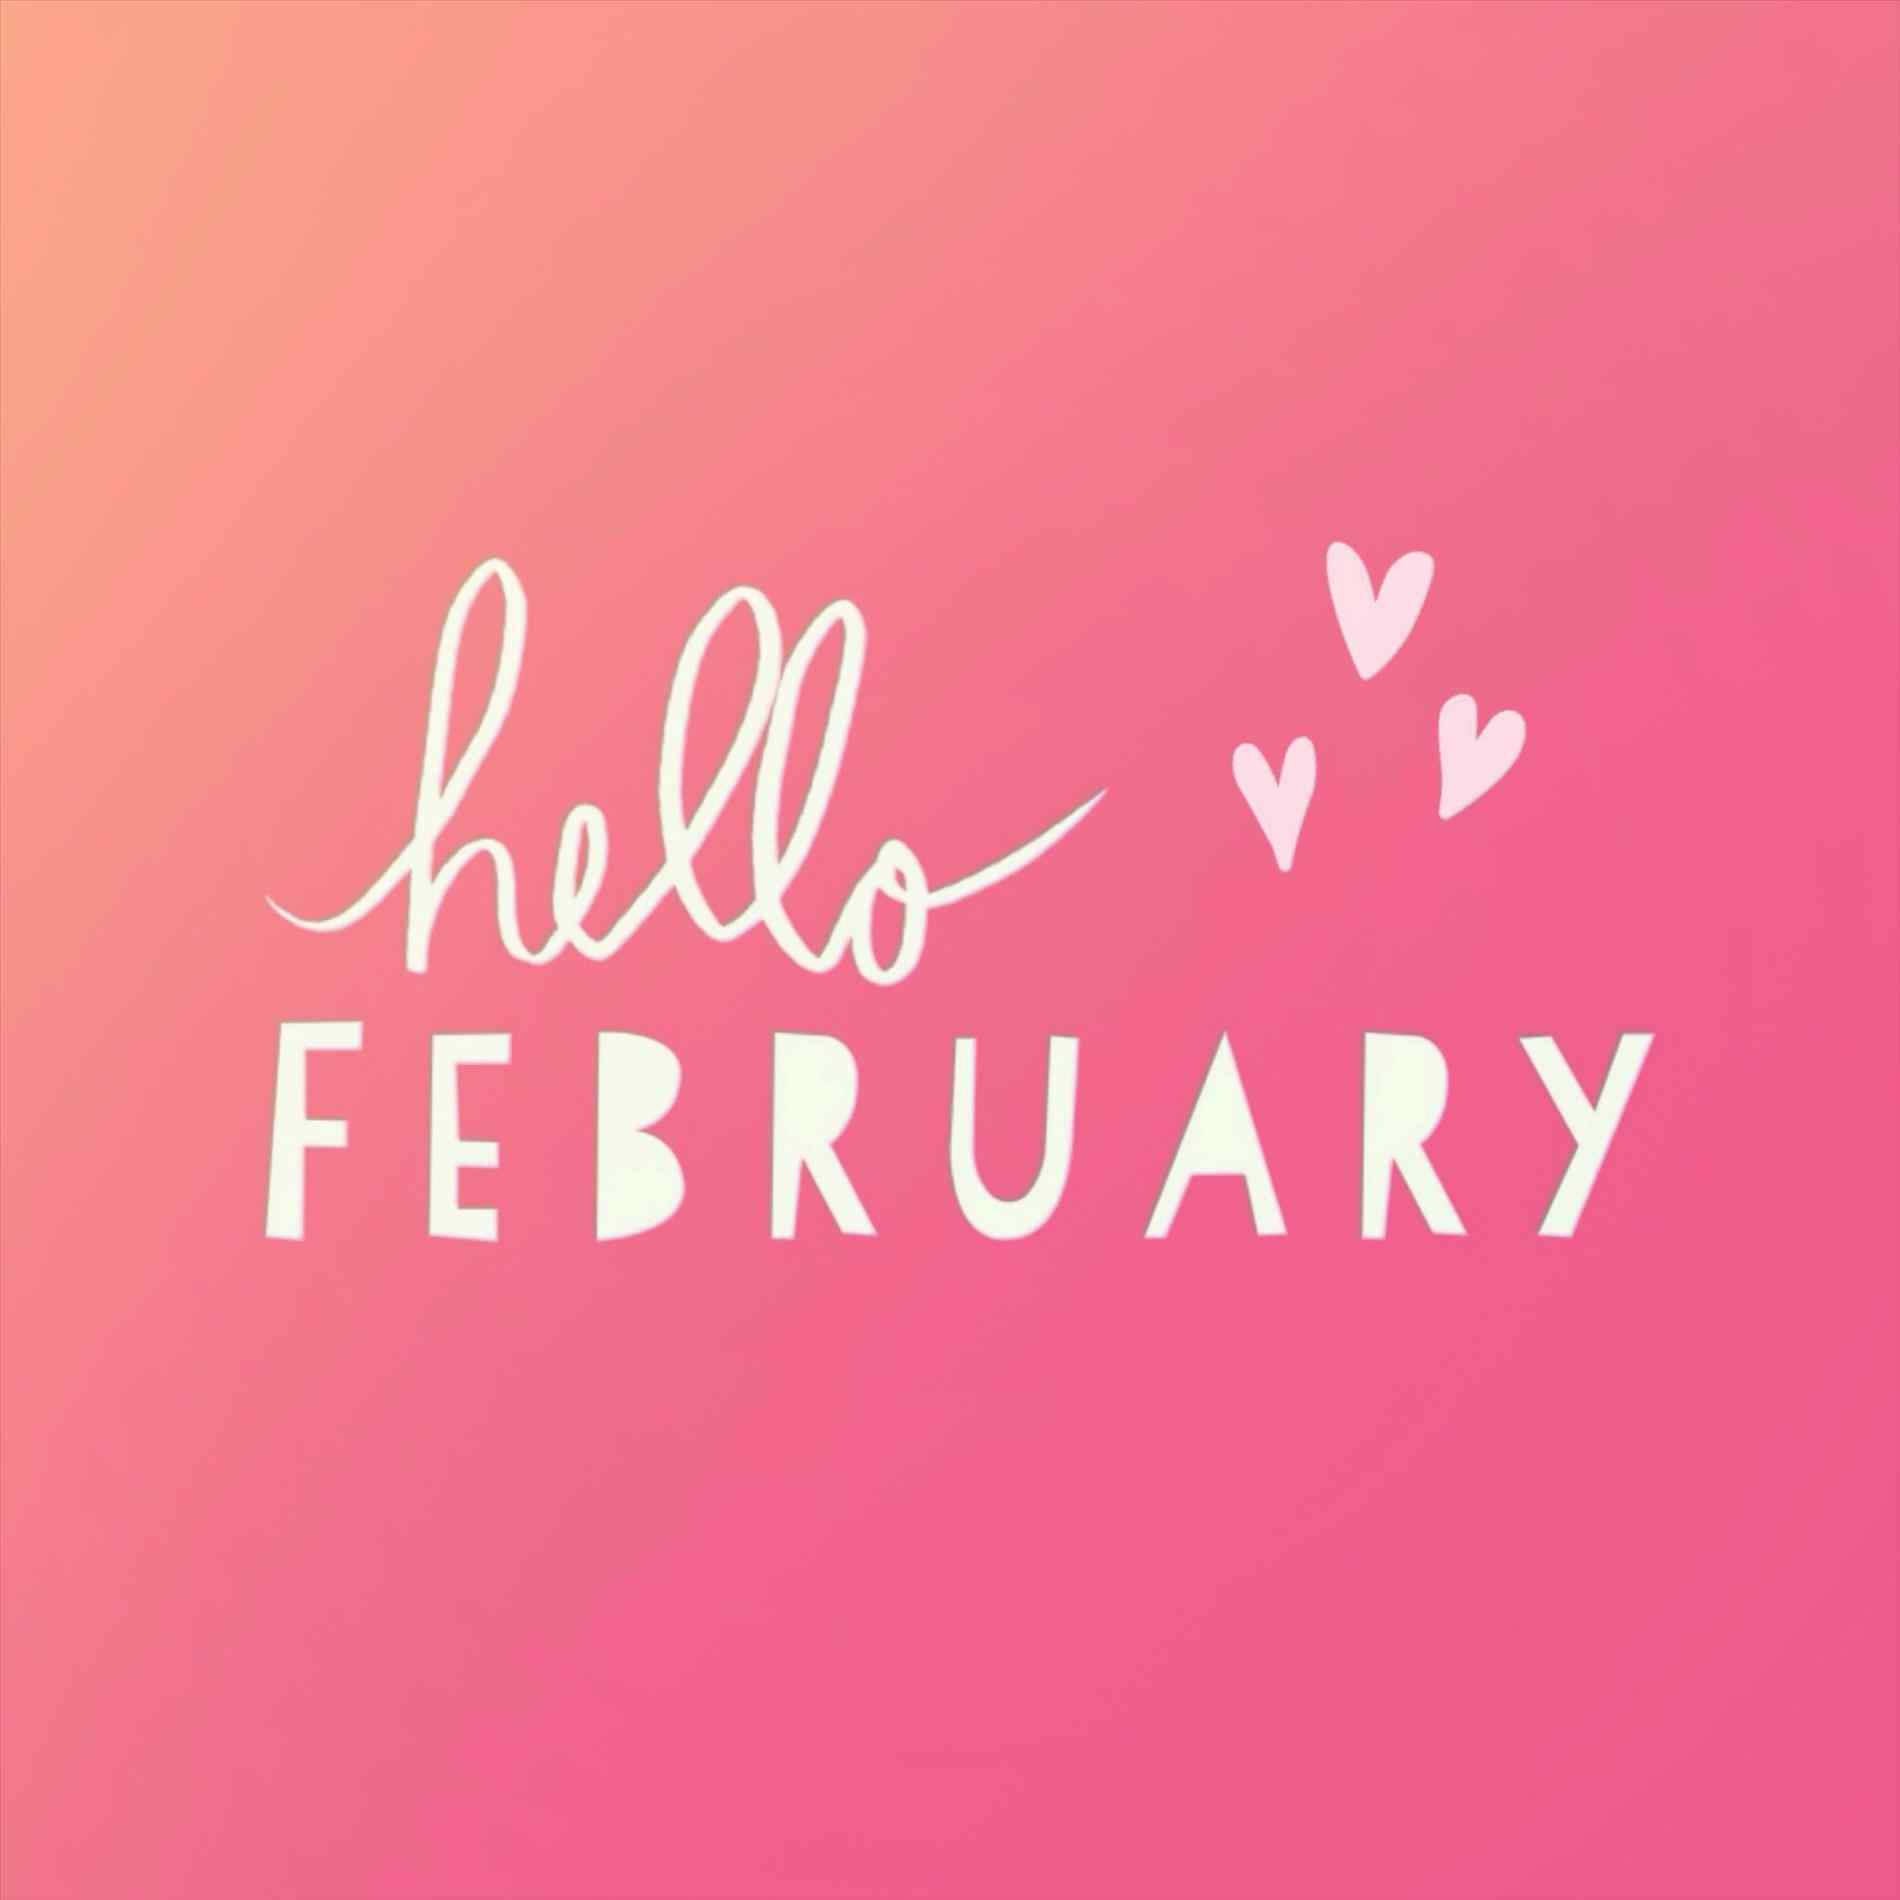 Hello February Pink Background Wallpaper